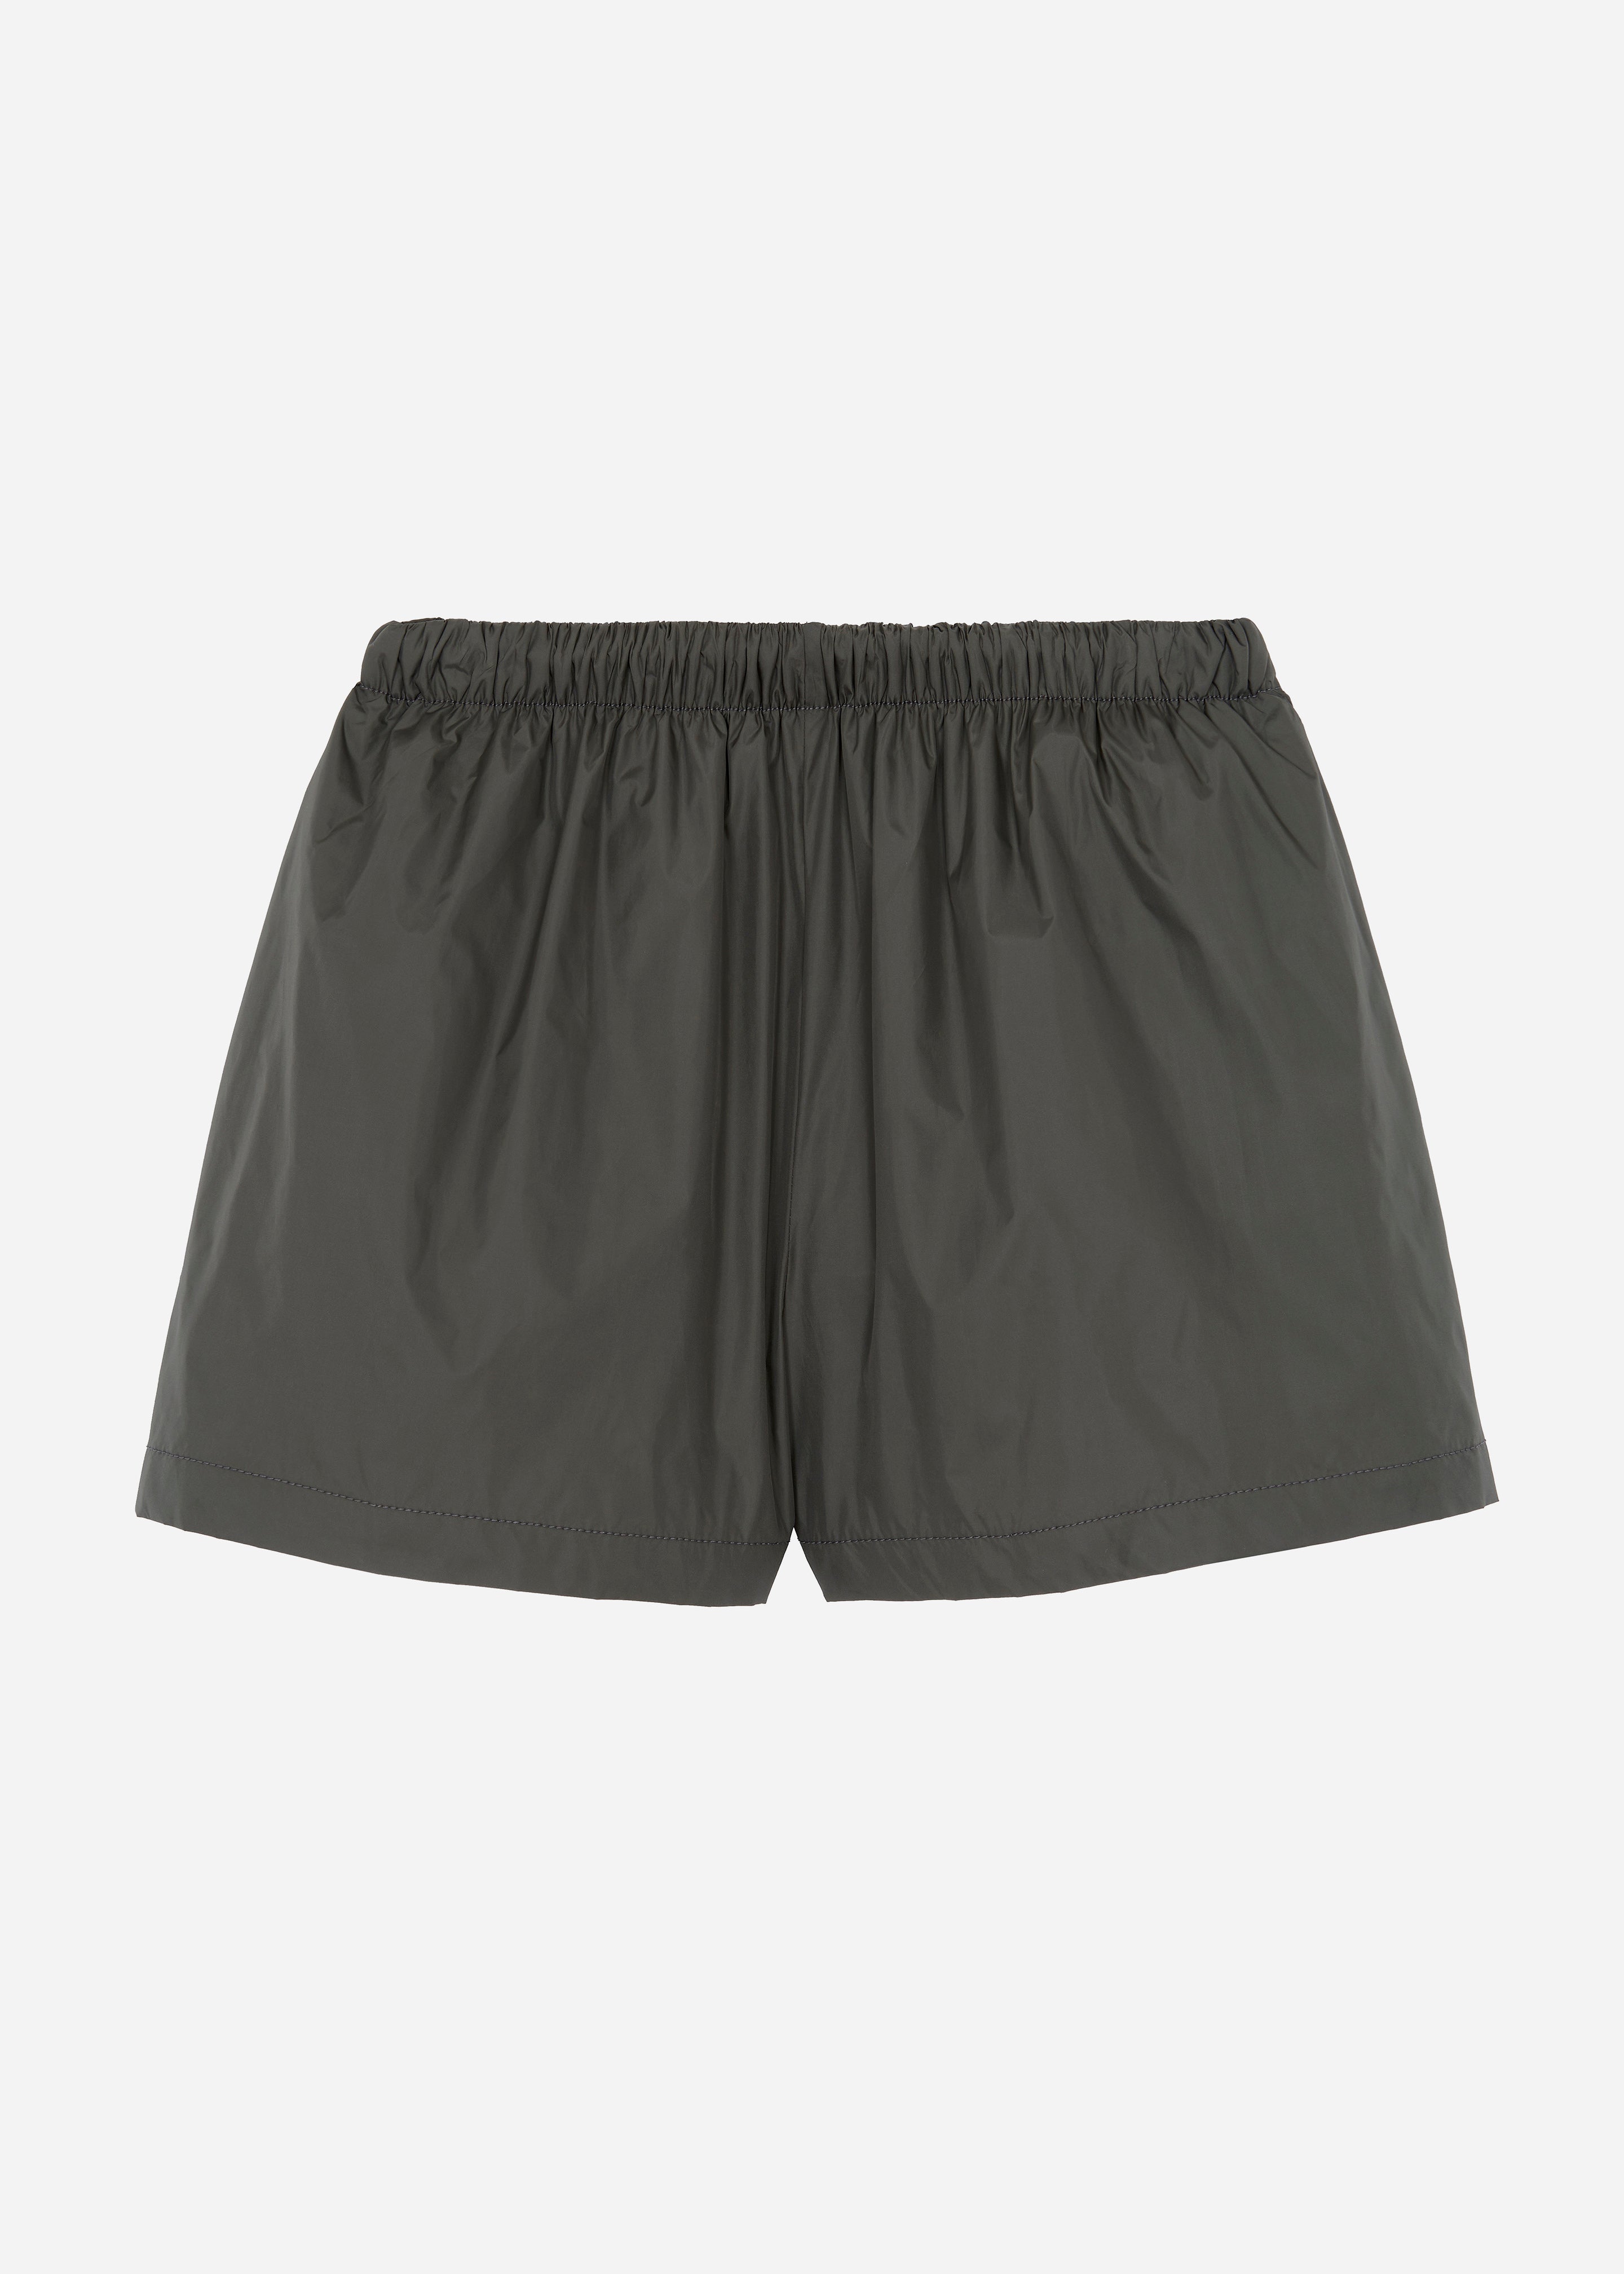 Lucy Shorts - Charcoal - 6